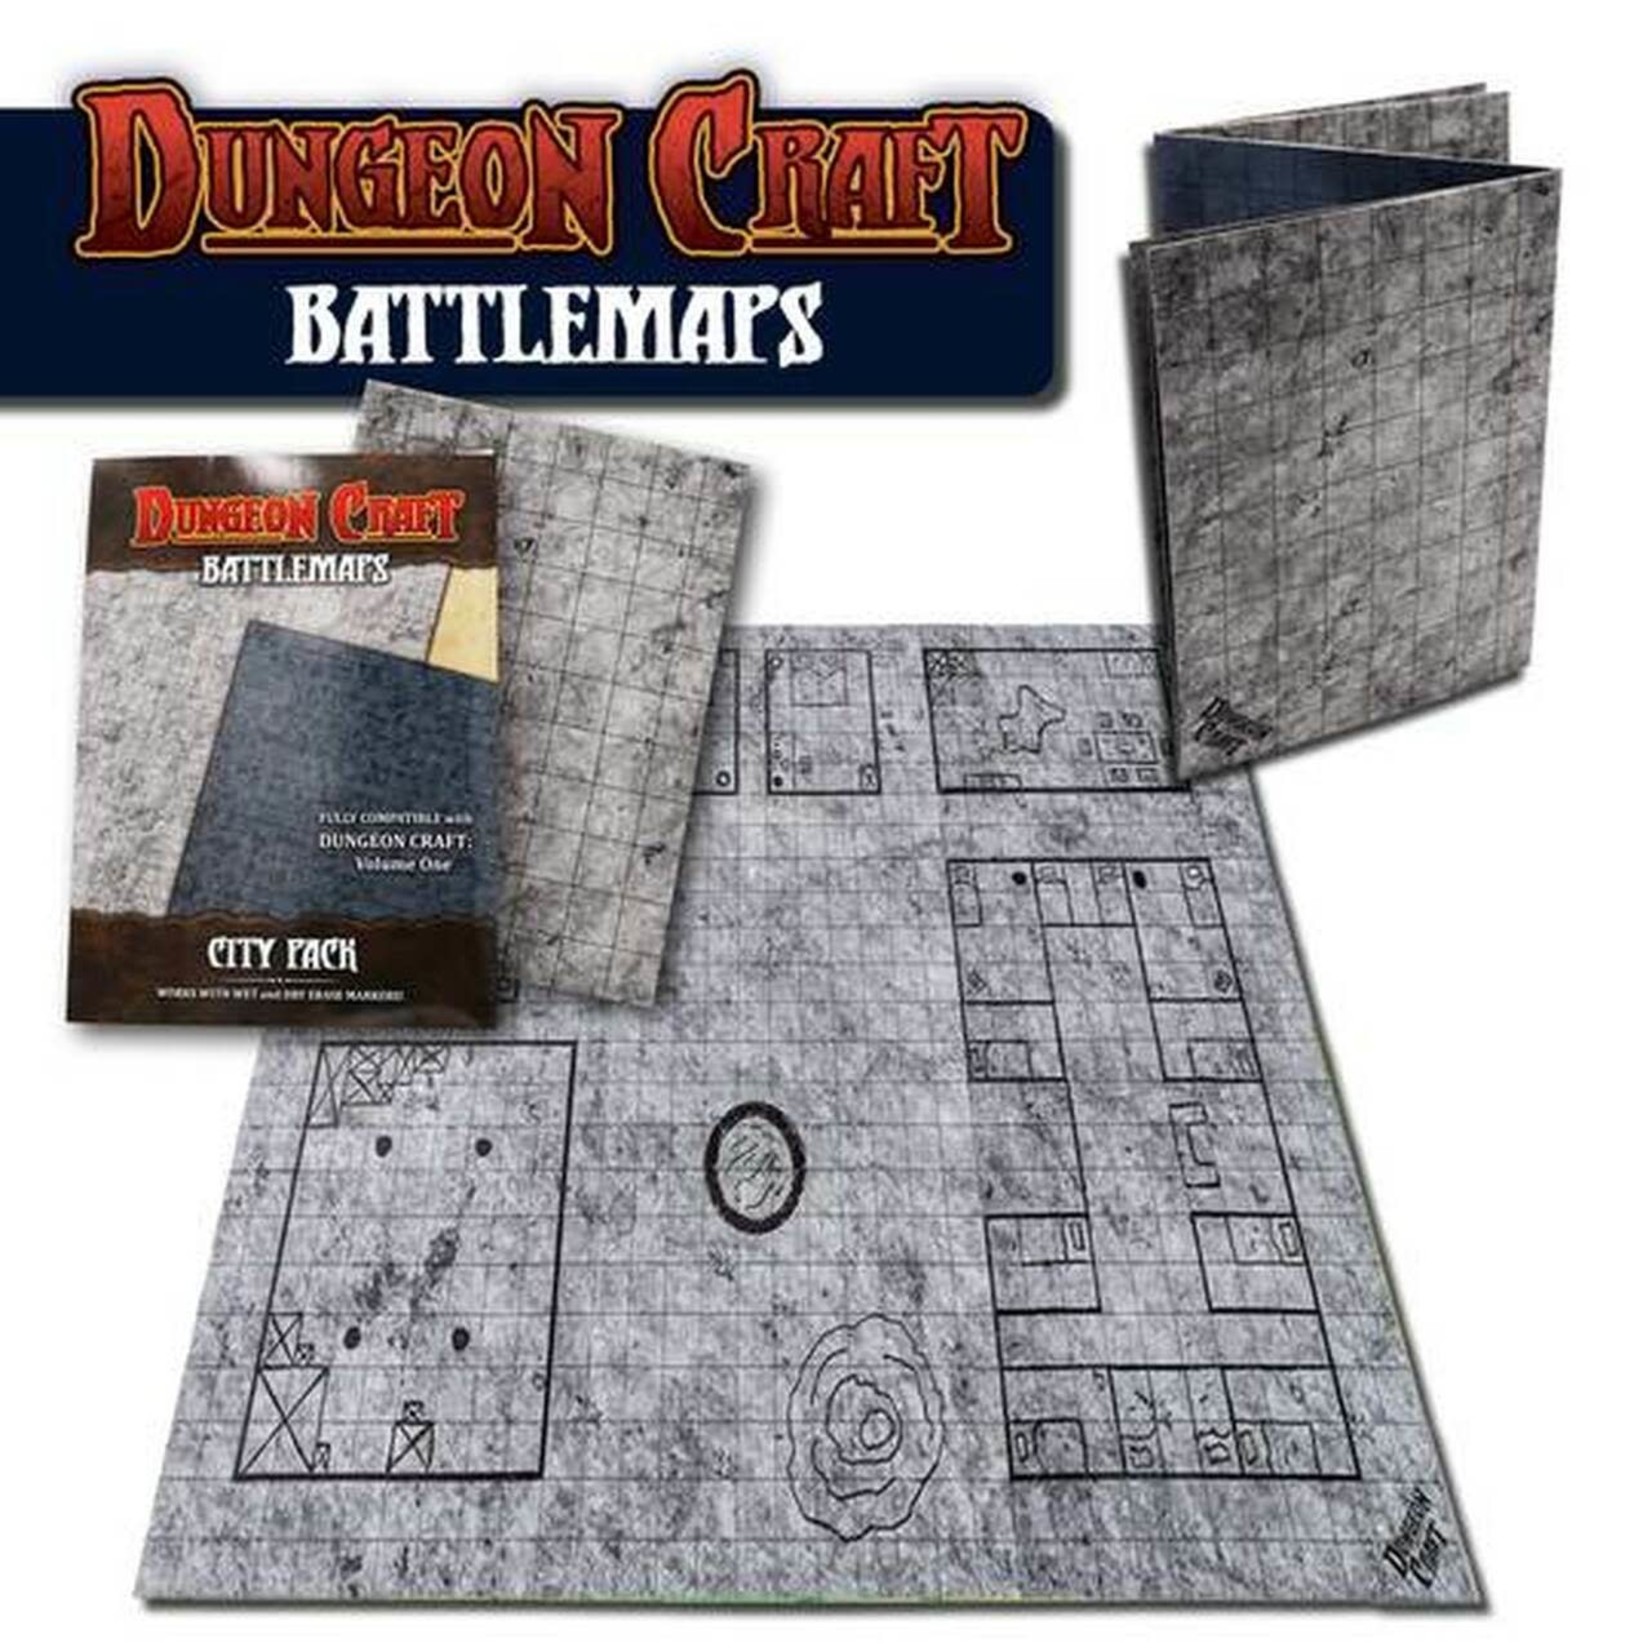 1985 Games Dungeon Craft Battle Maps City Pack